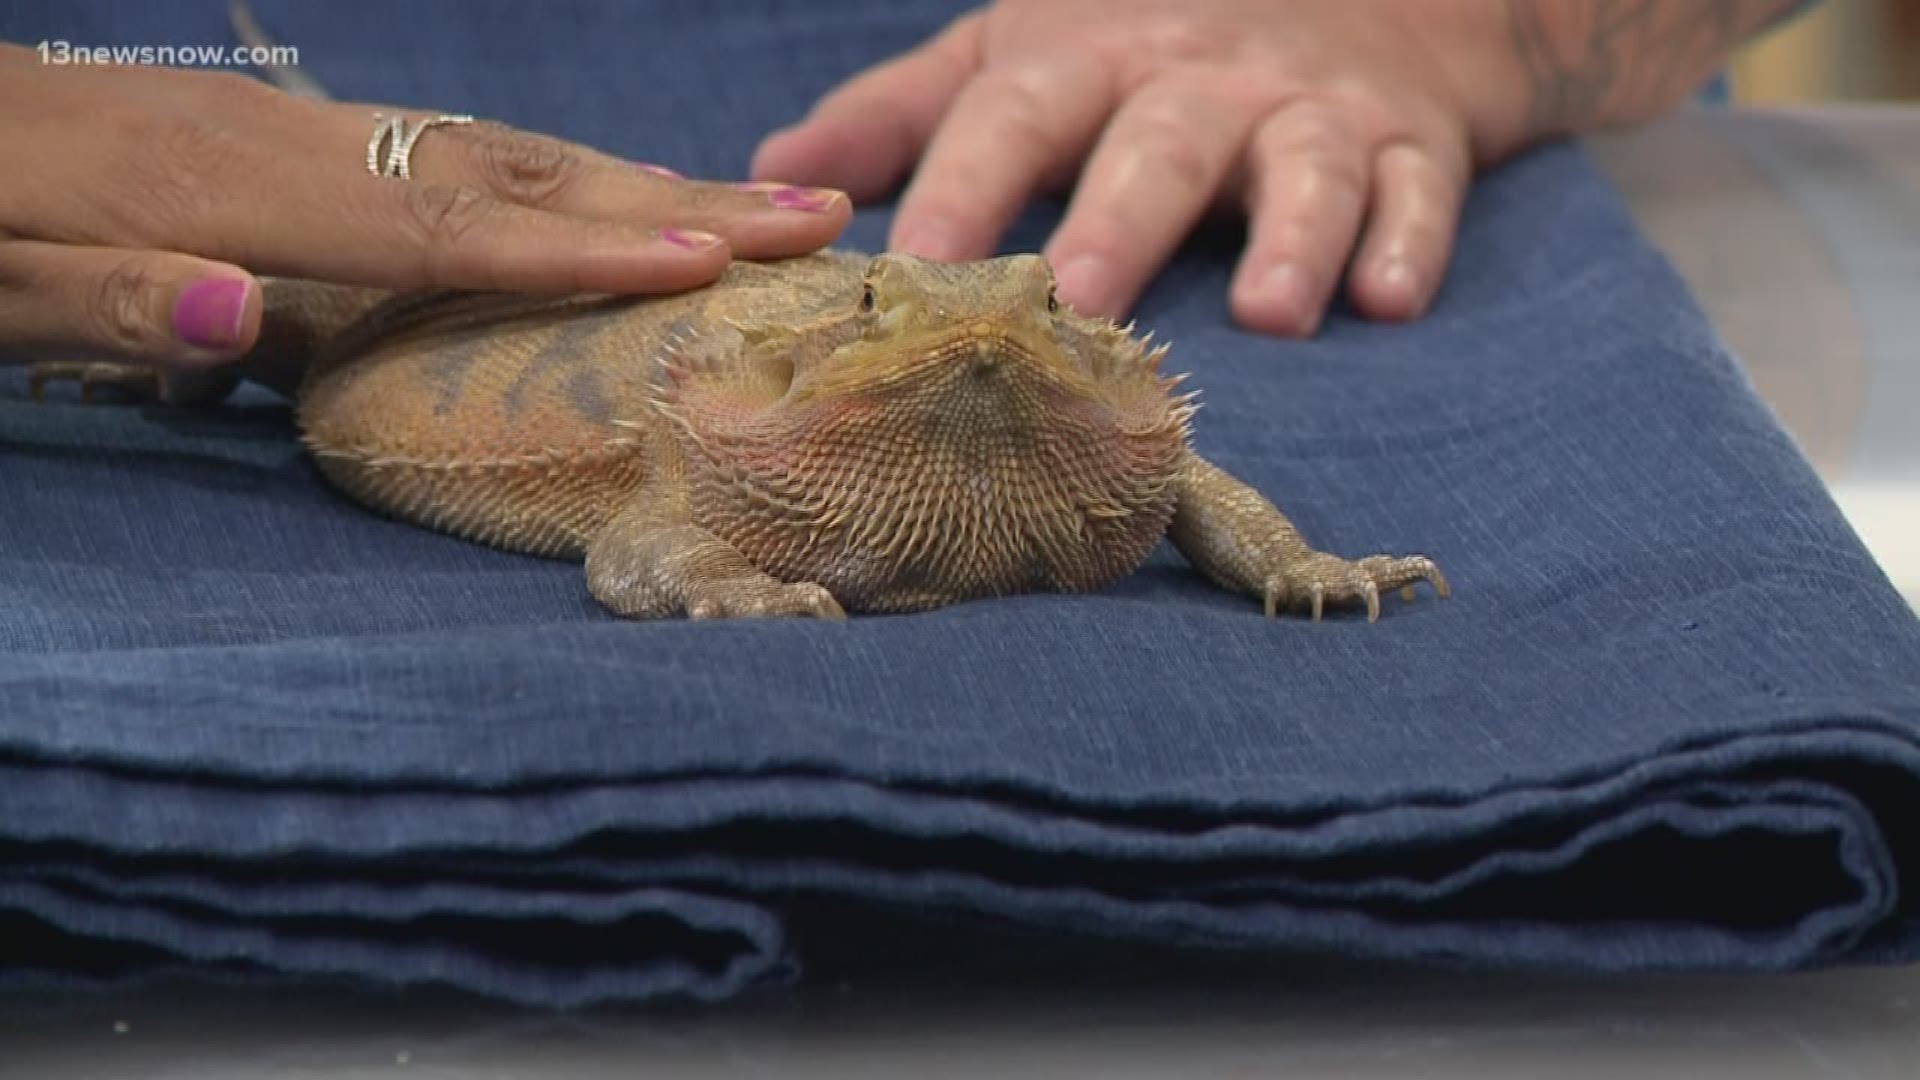 Luna, a giant bearded dragon, comes from The Bunny Hutch in Virginia Beach.